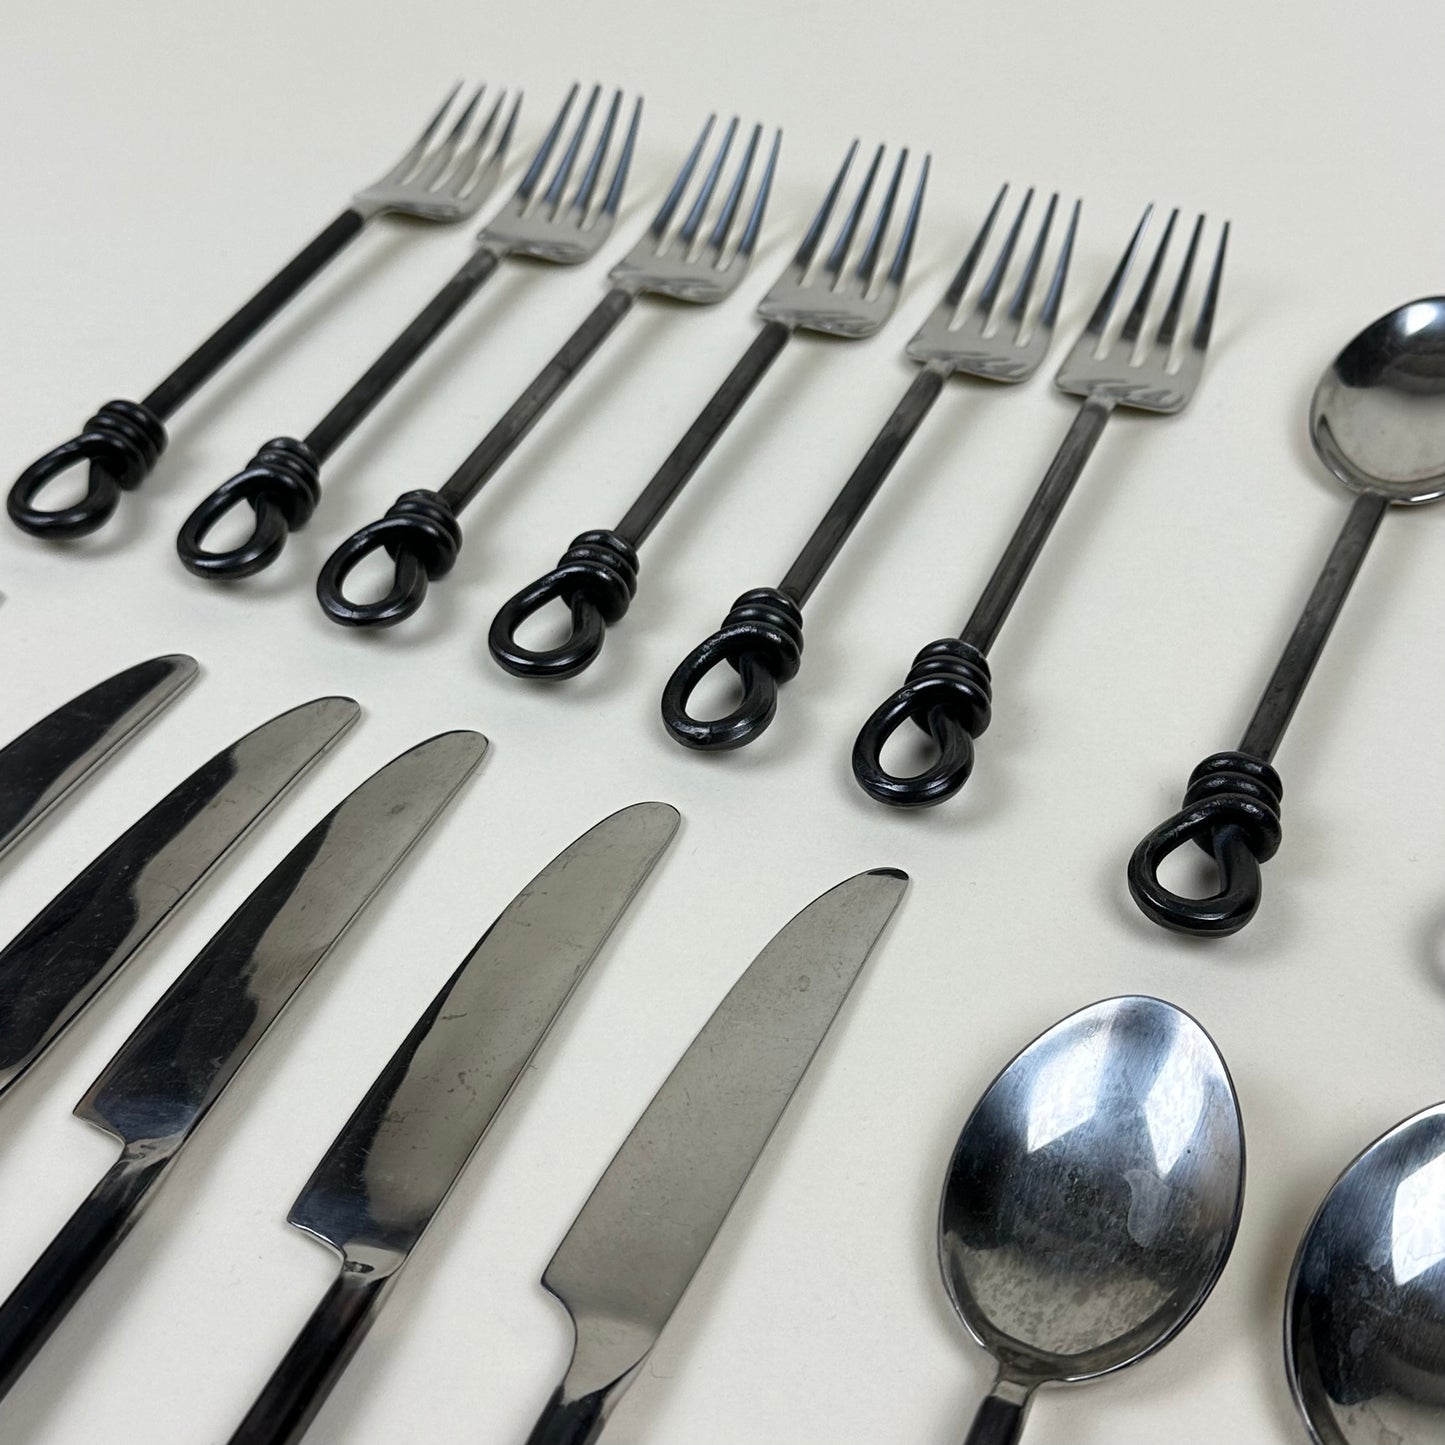 Cutlery with knot, vintage, 18 pieces